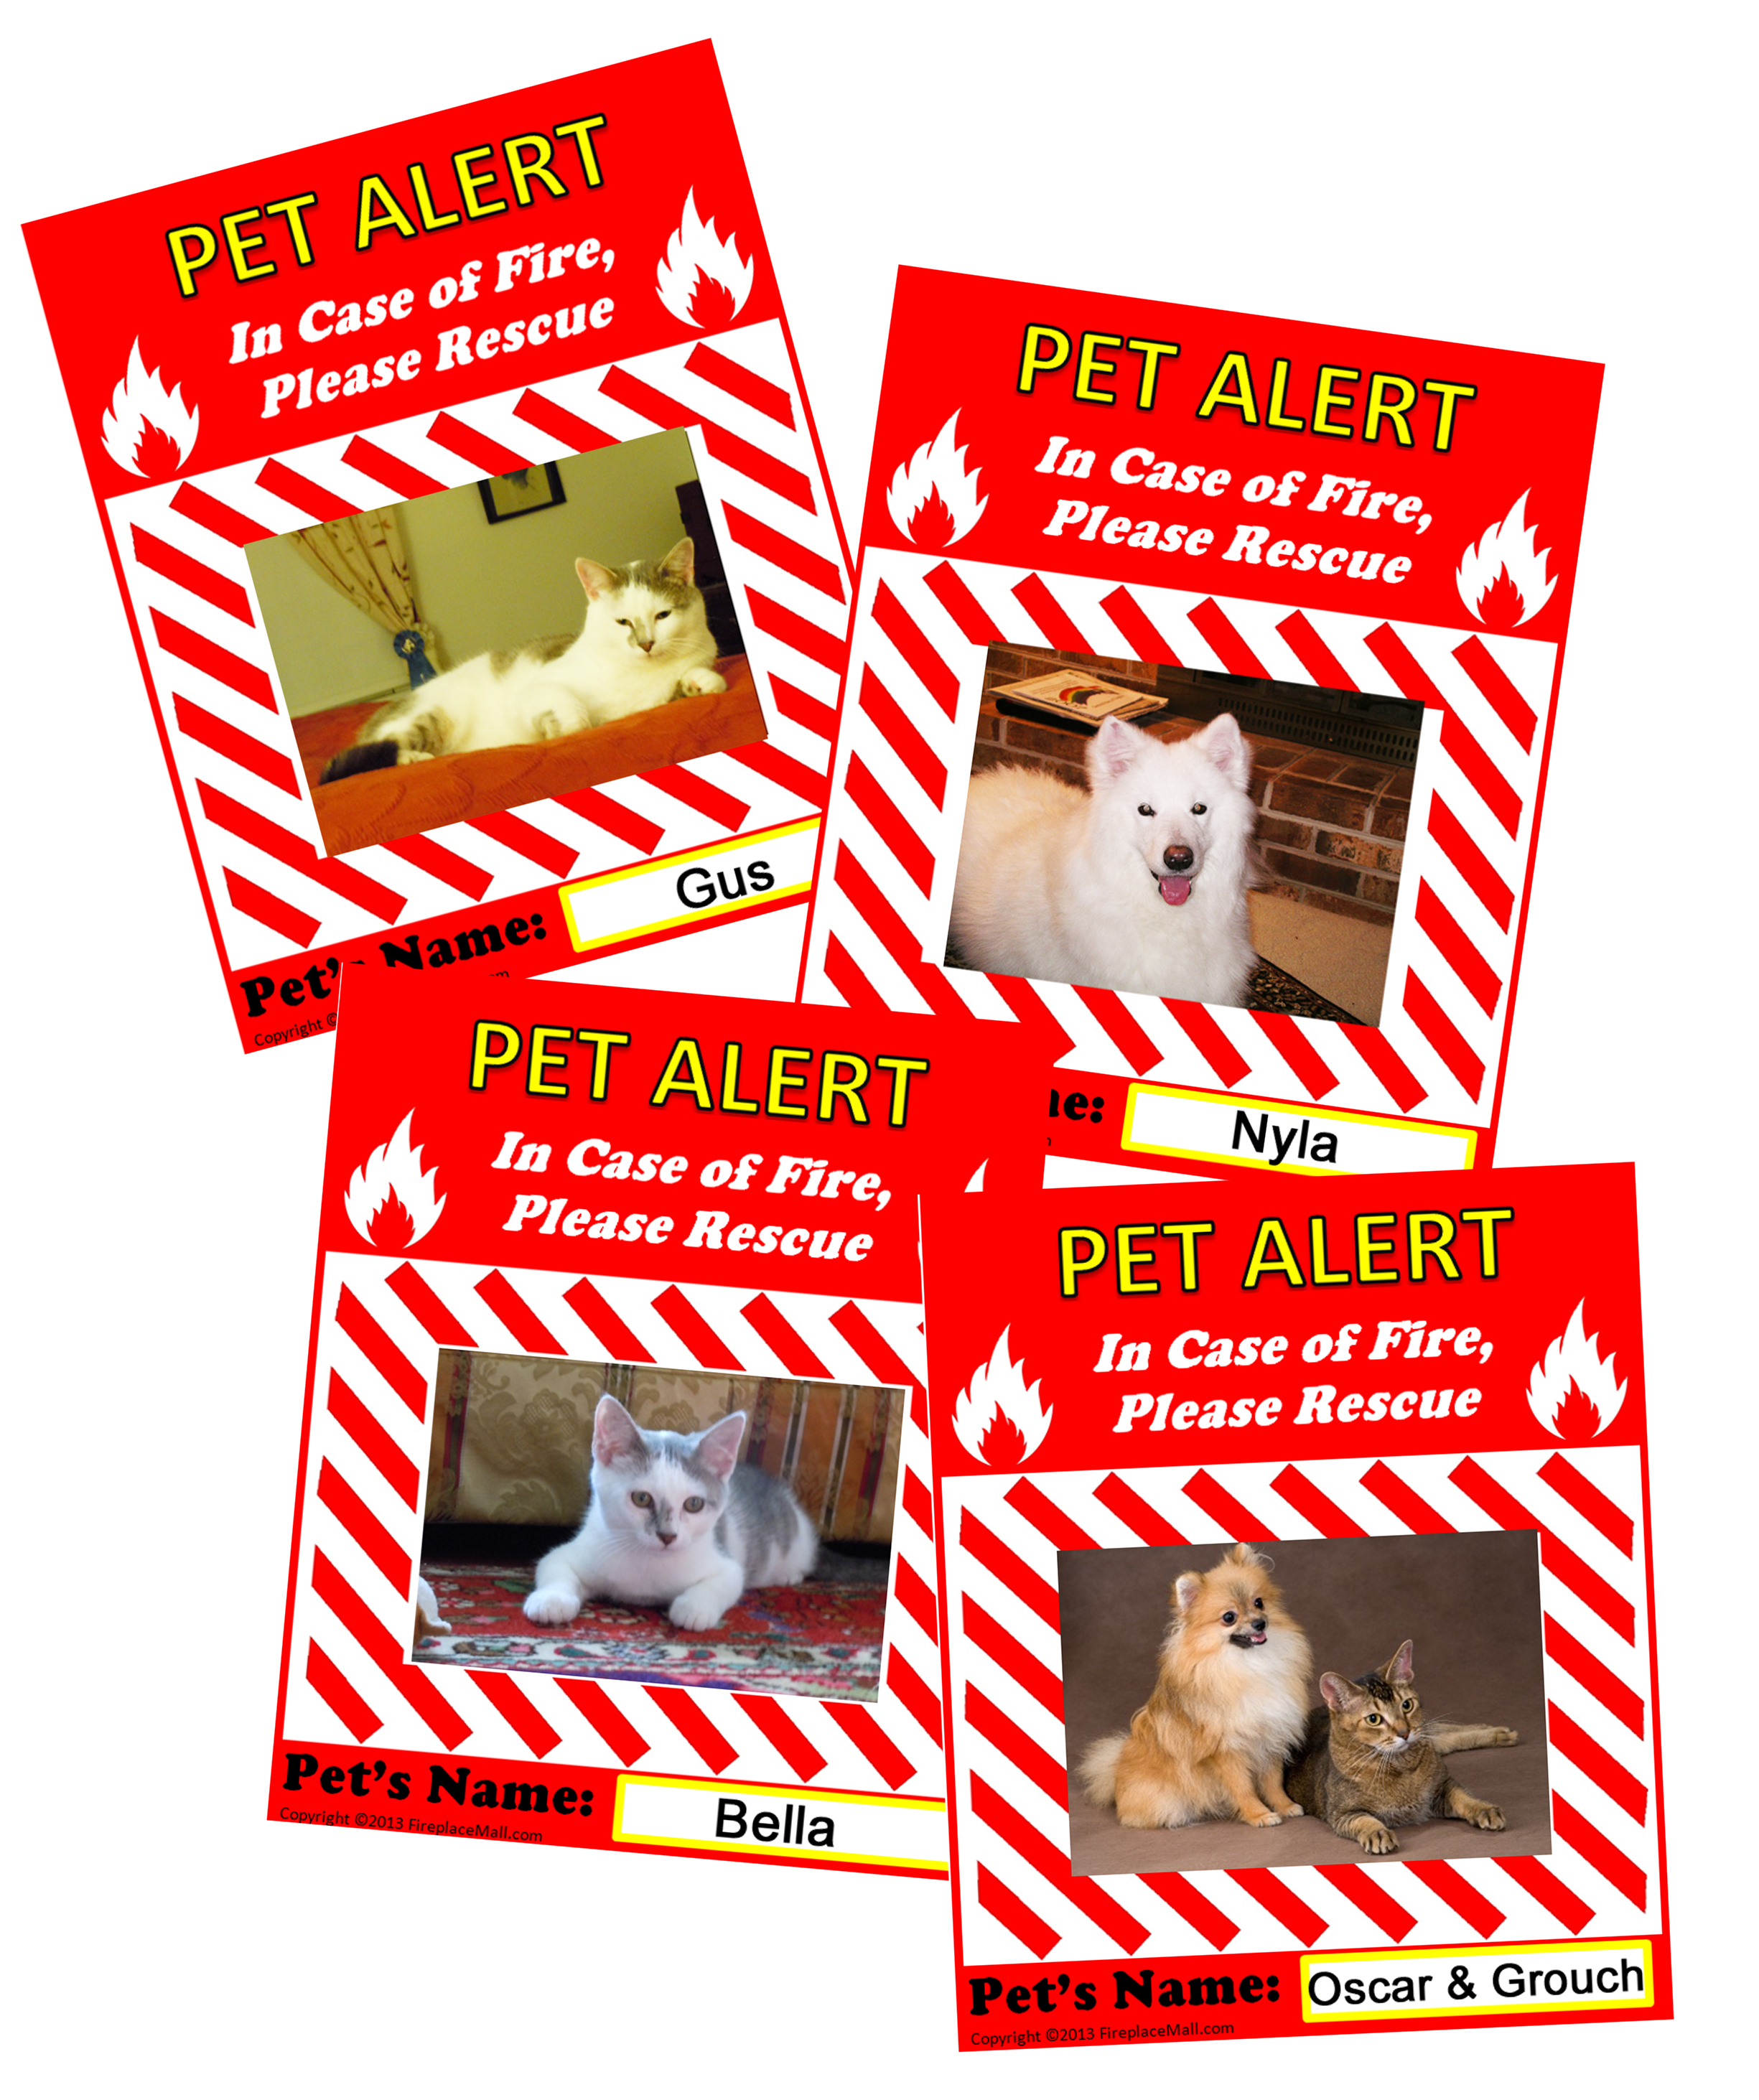 Download this Pet Alert, Add Your Pet's Photo and Name. Save lives in the event of fire.